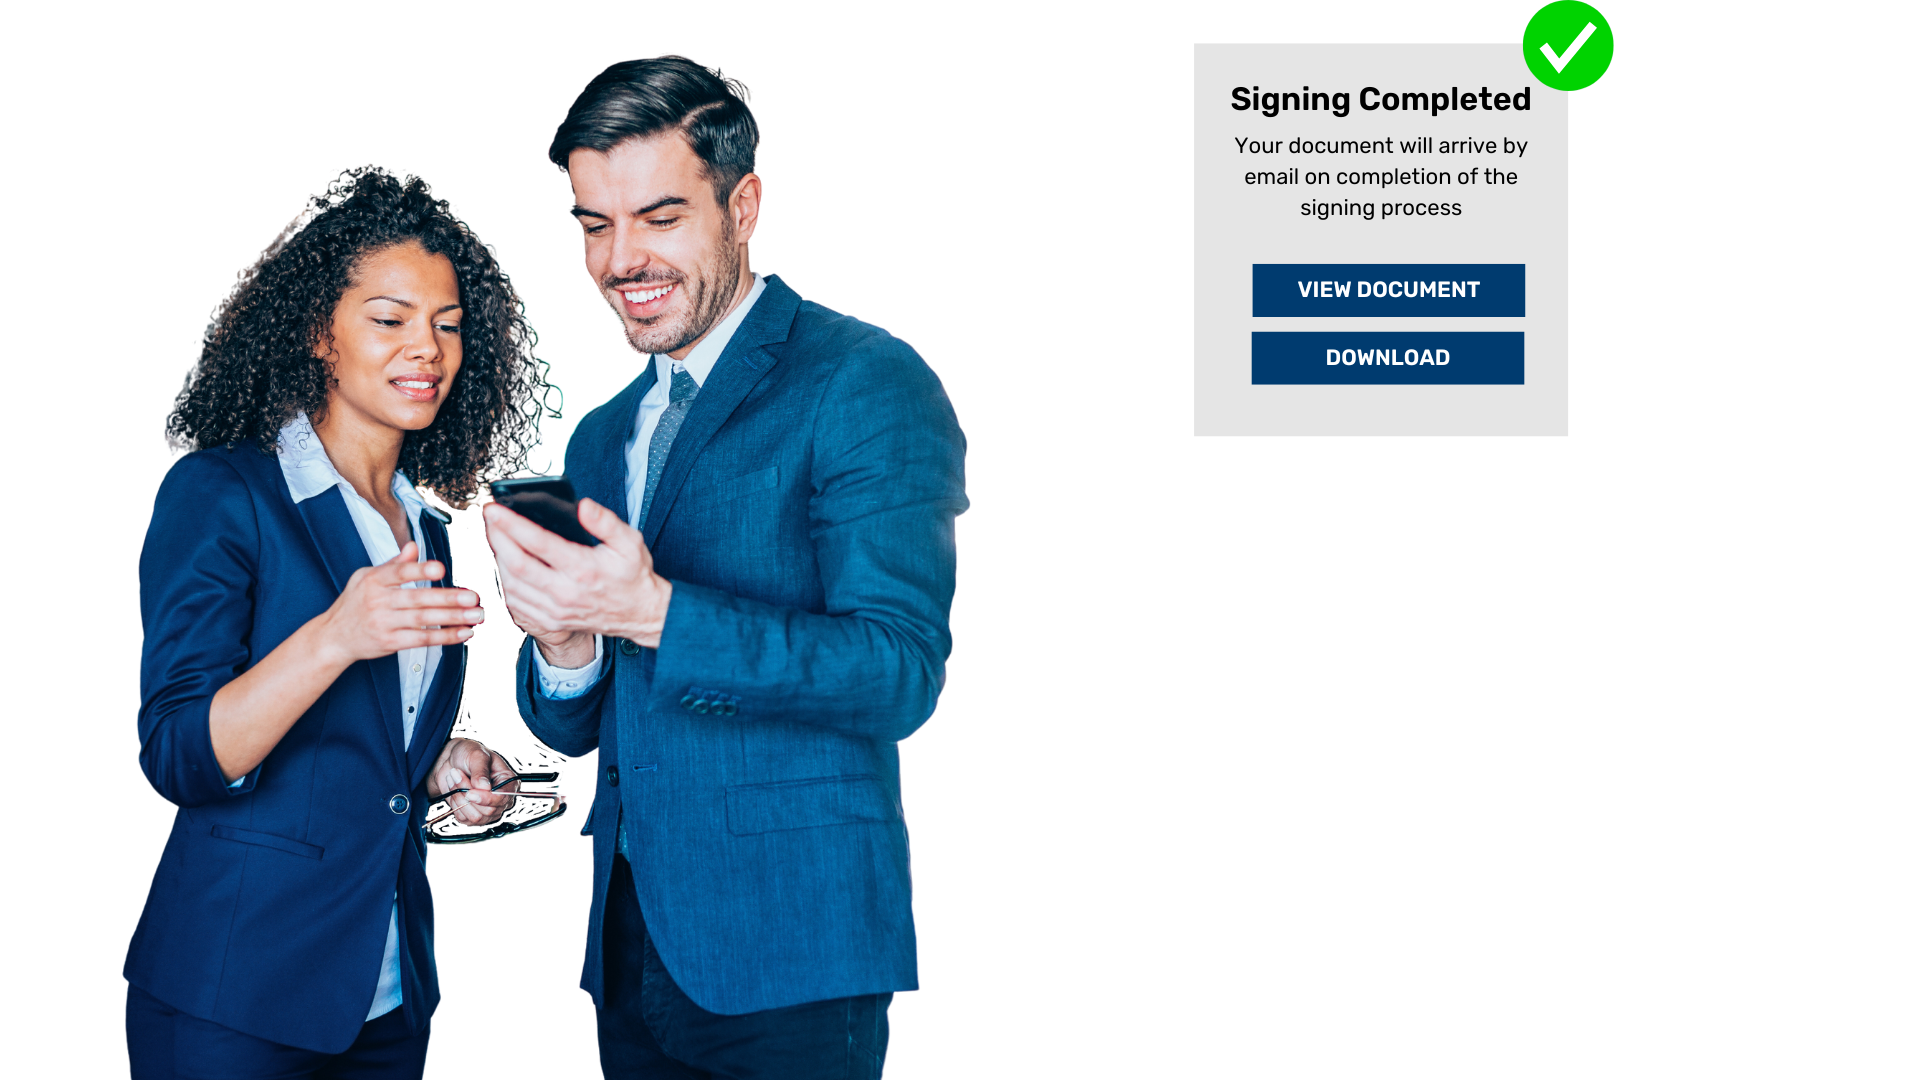 digital signature software for business and enterprise with secured signing